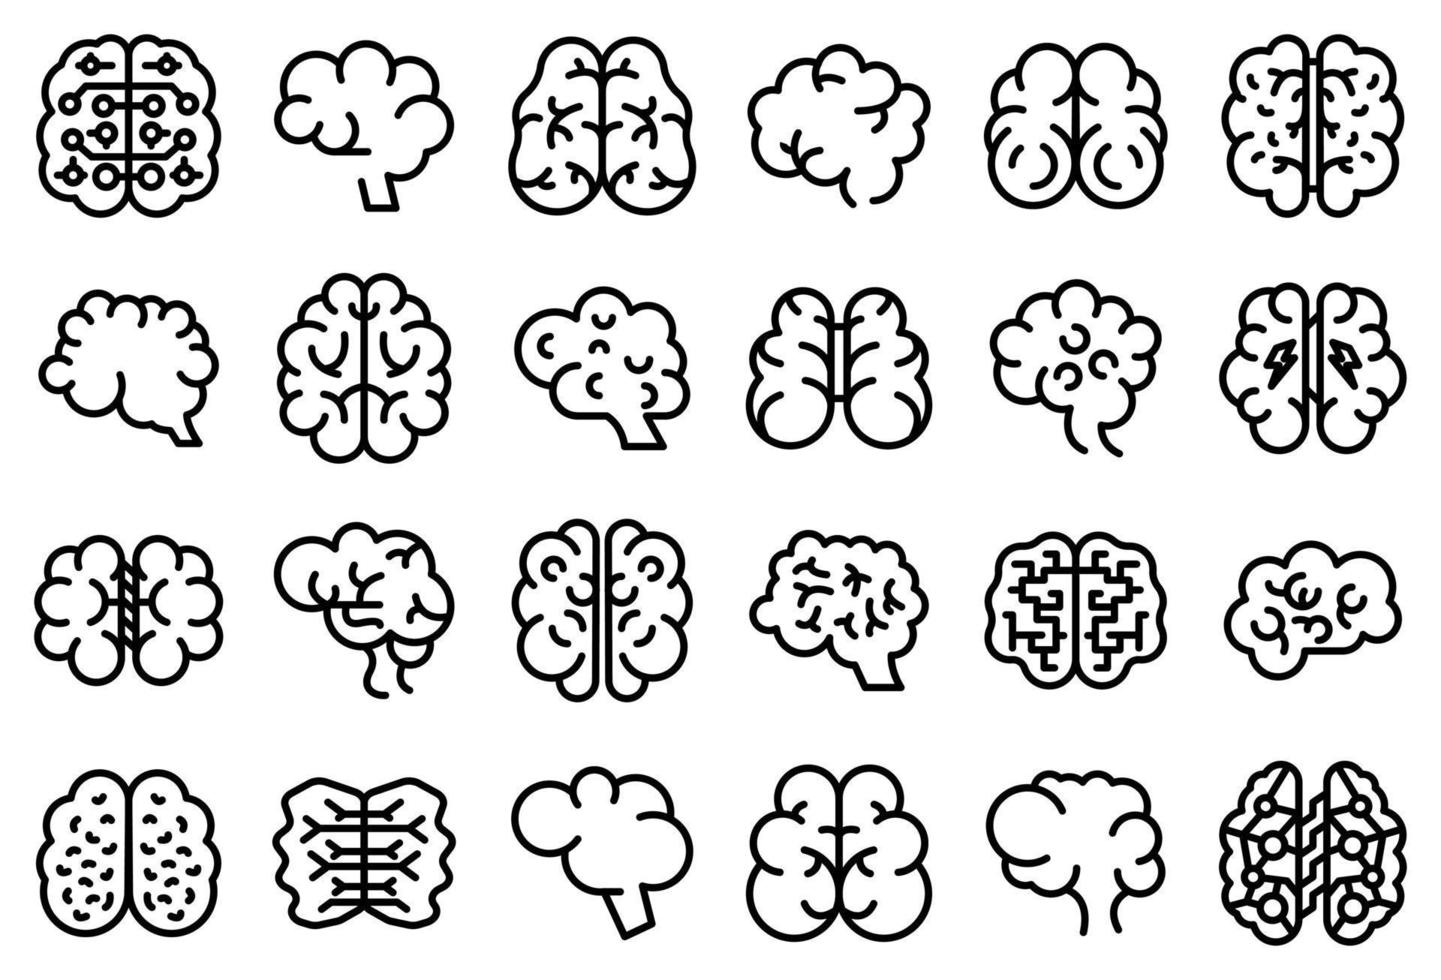 Human brain icons set, outline style vector